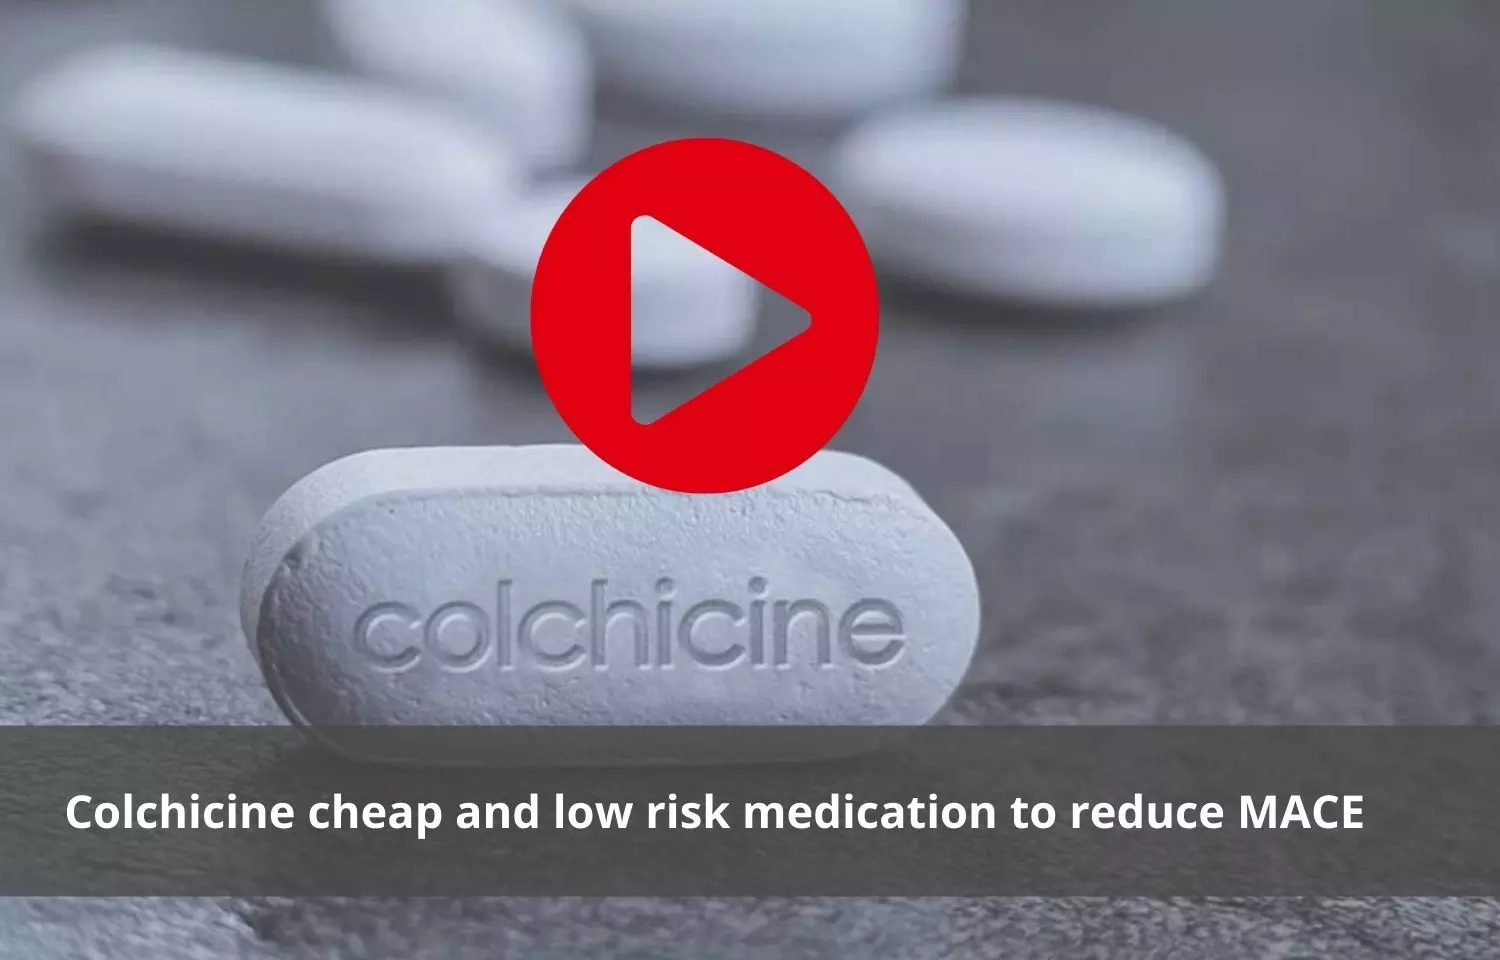 Colchicine an effective and cheap medication to reduce MACE